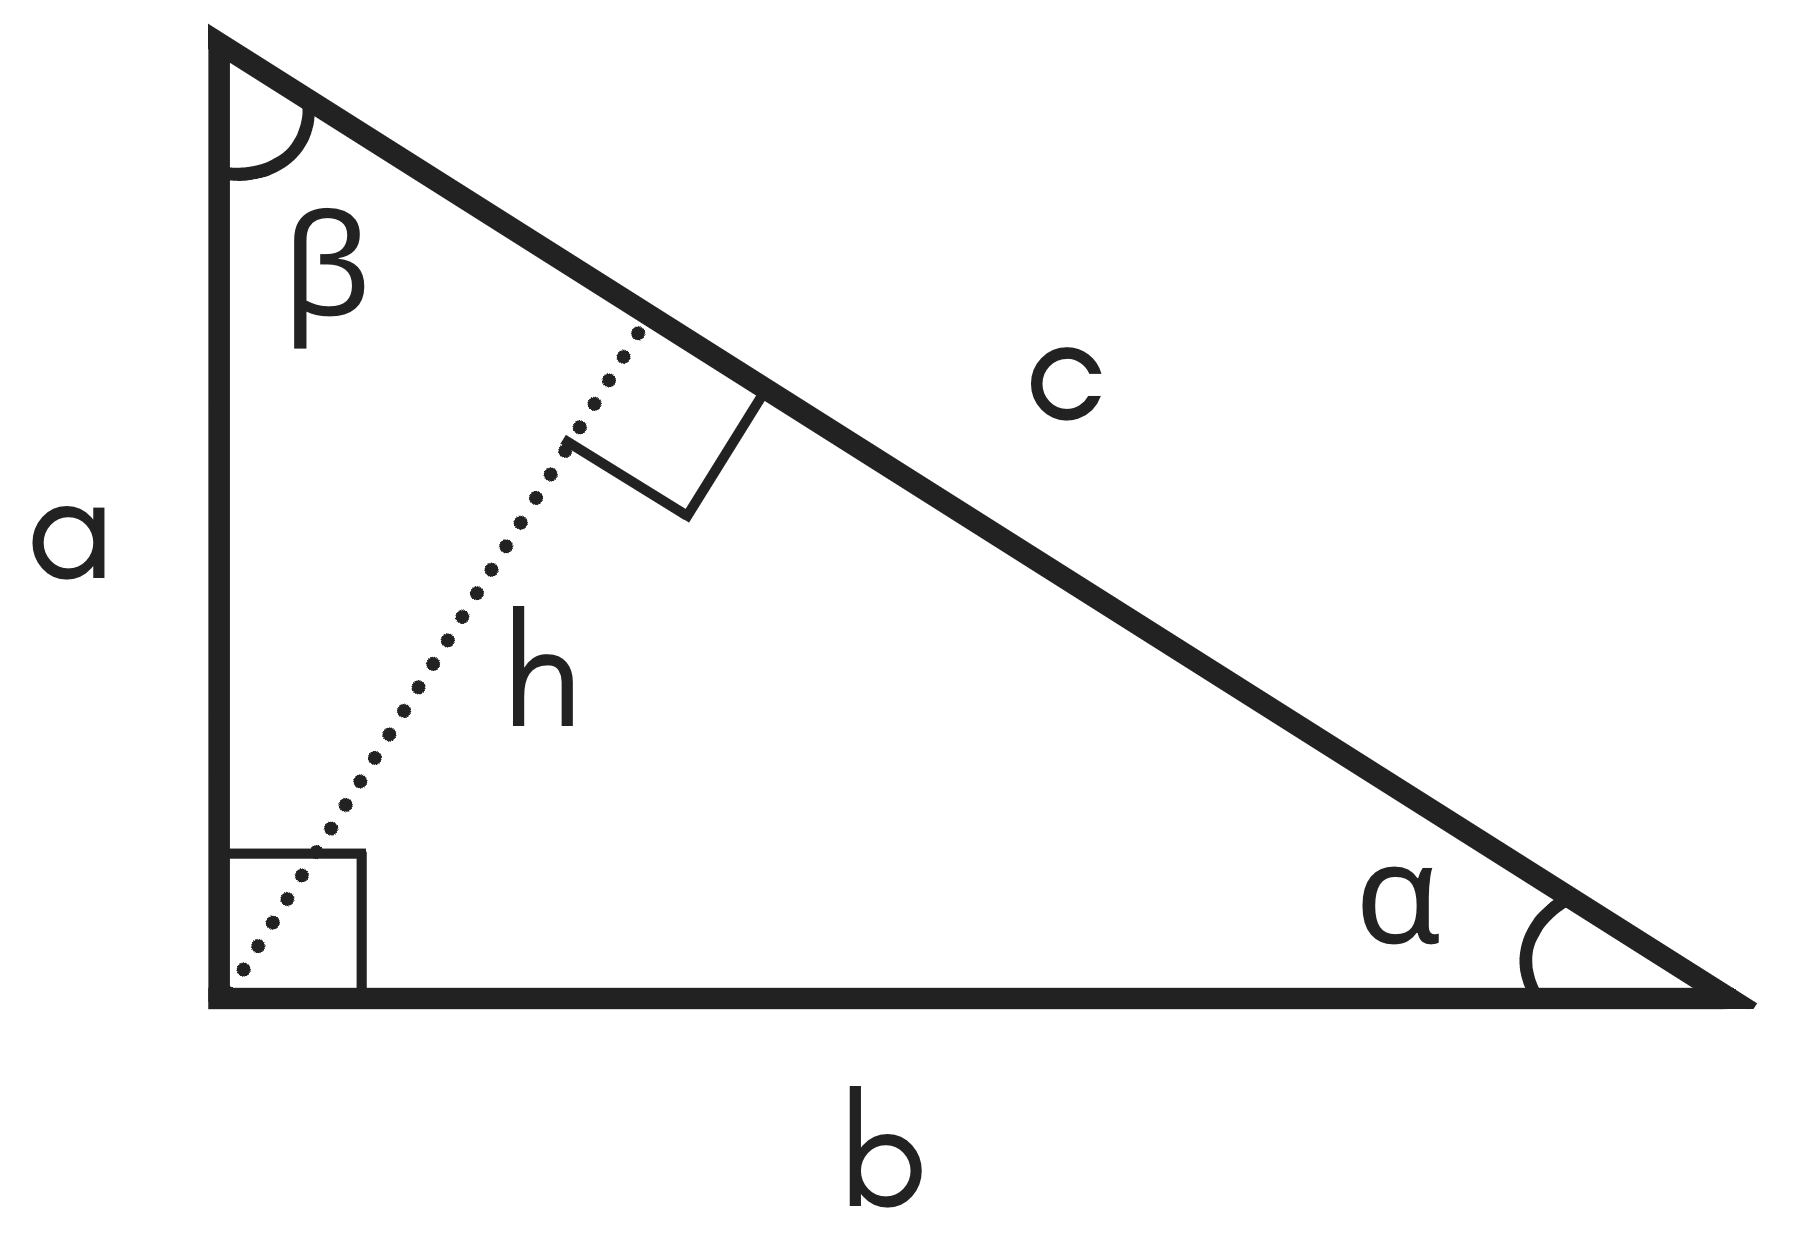 diagram of a right triangle showing legs a and b, hypotenuse c, angles alpha and beta, and height h